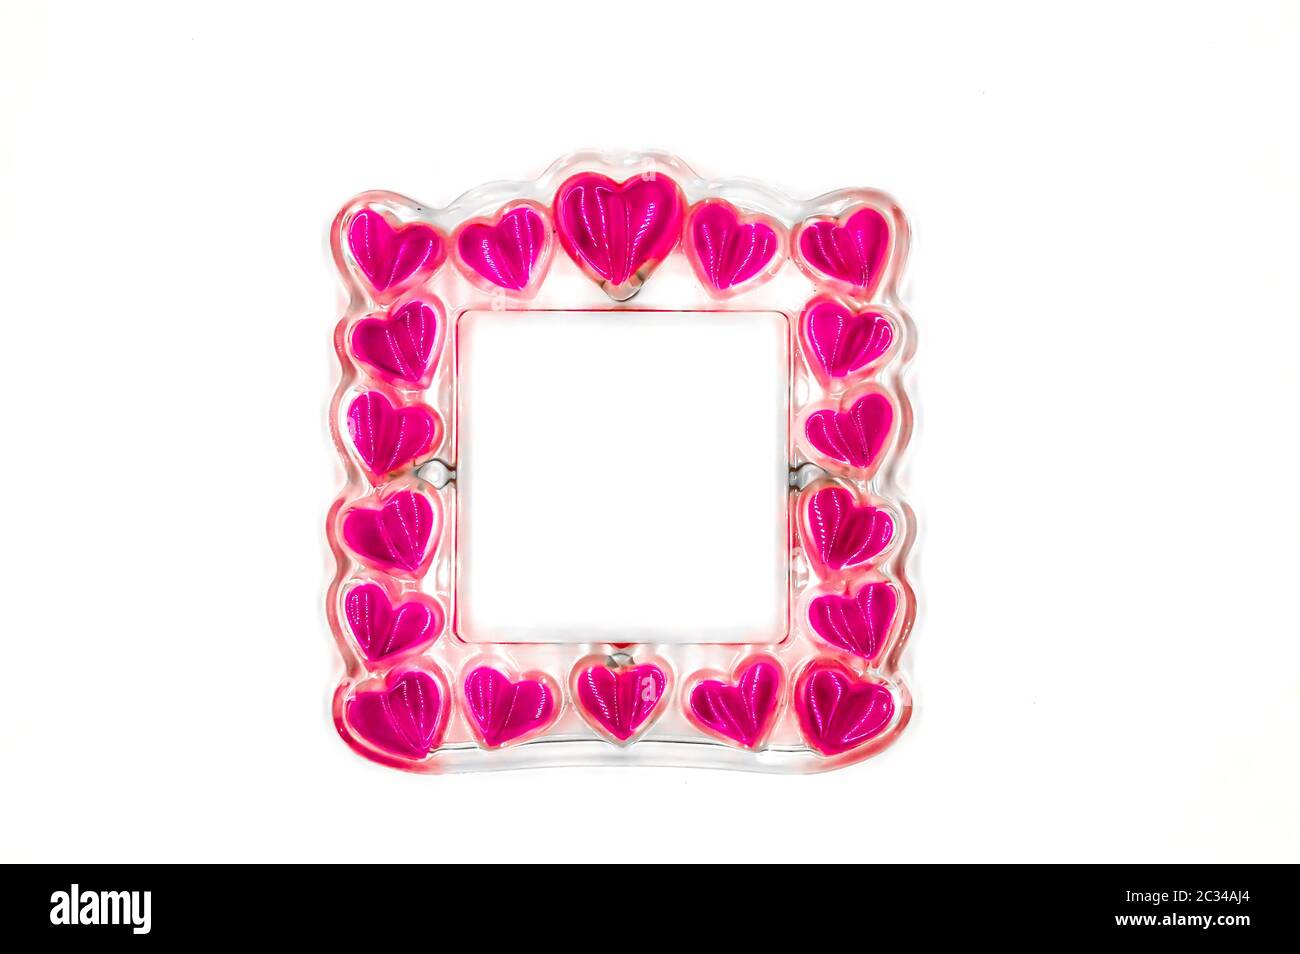 Square dish with multiple hearts on a white background Stock Photo